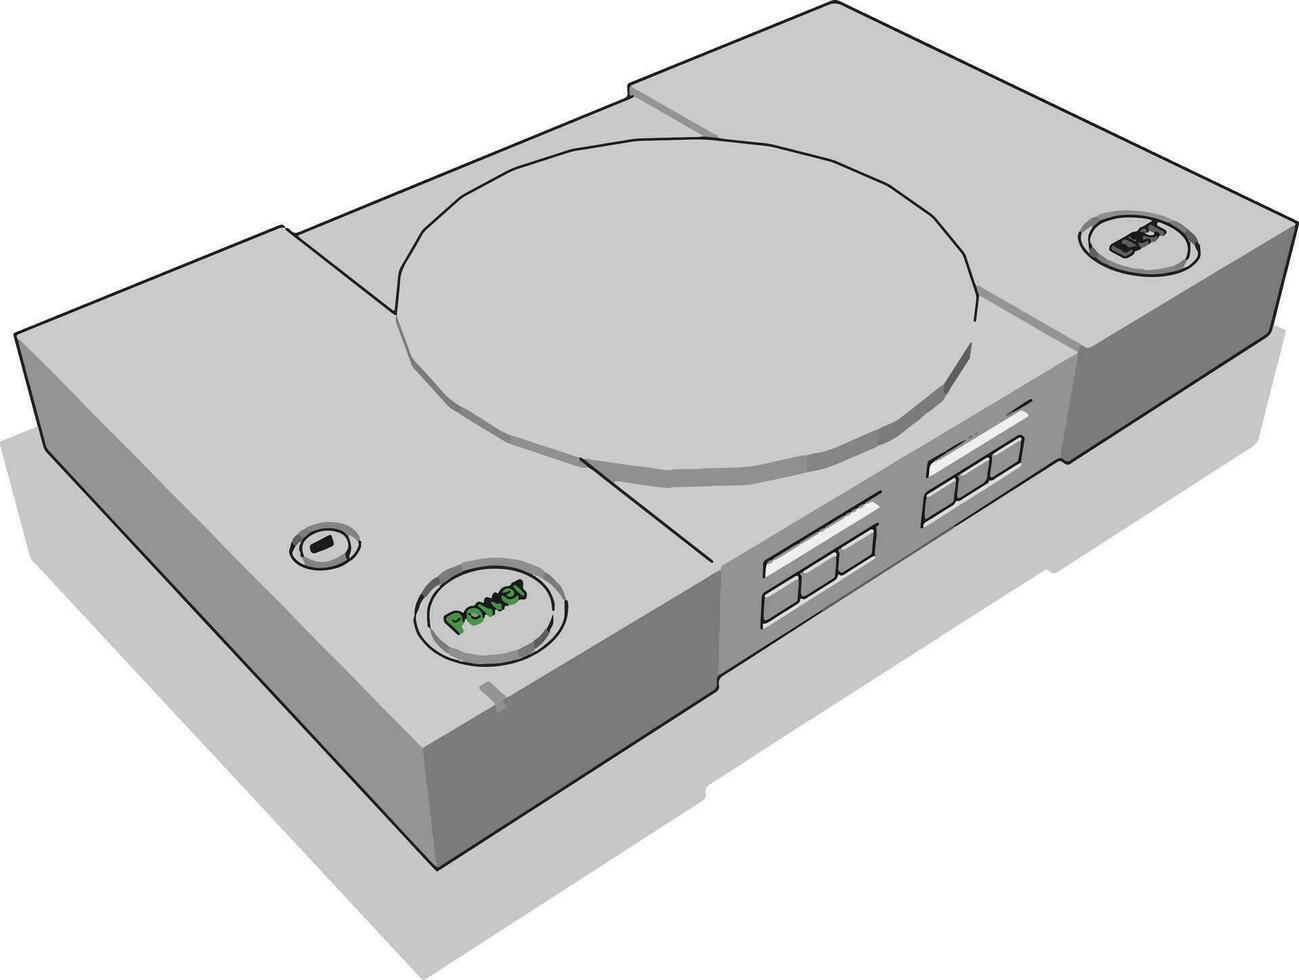 Console, illustration, vector on white background.